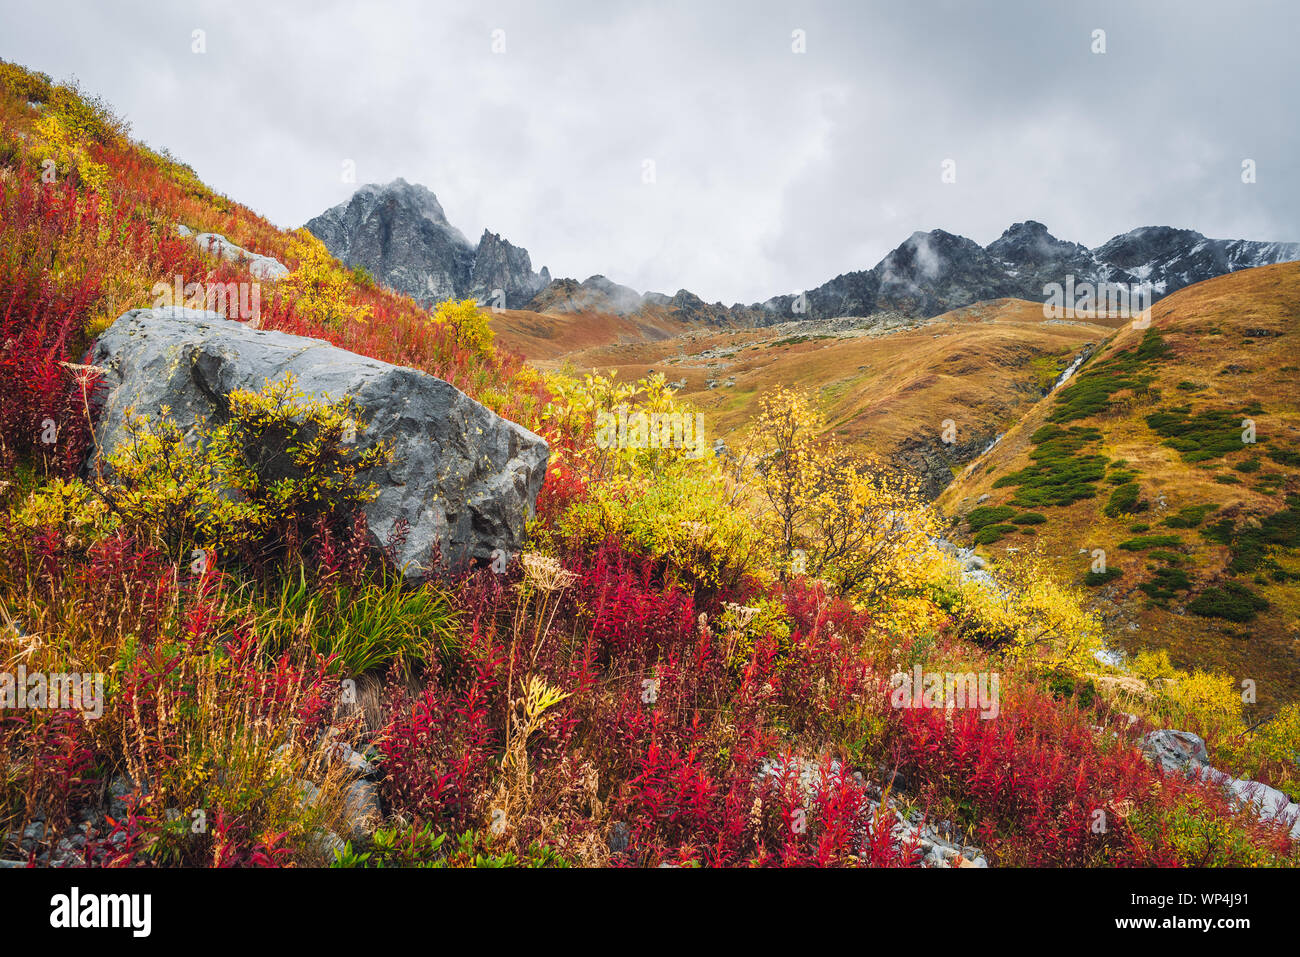 Autumn landscape in the mountains. Beautiful trees and bushes on the hillside. Caucasus, Georgia, Zemo Svaneti Stock Photo